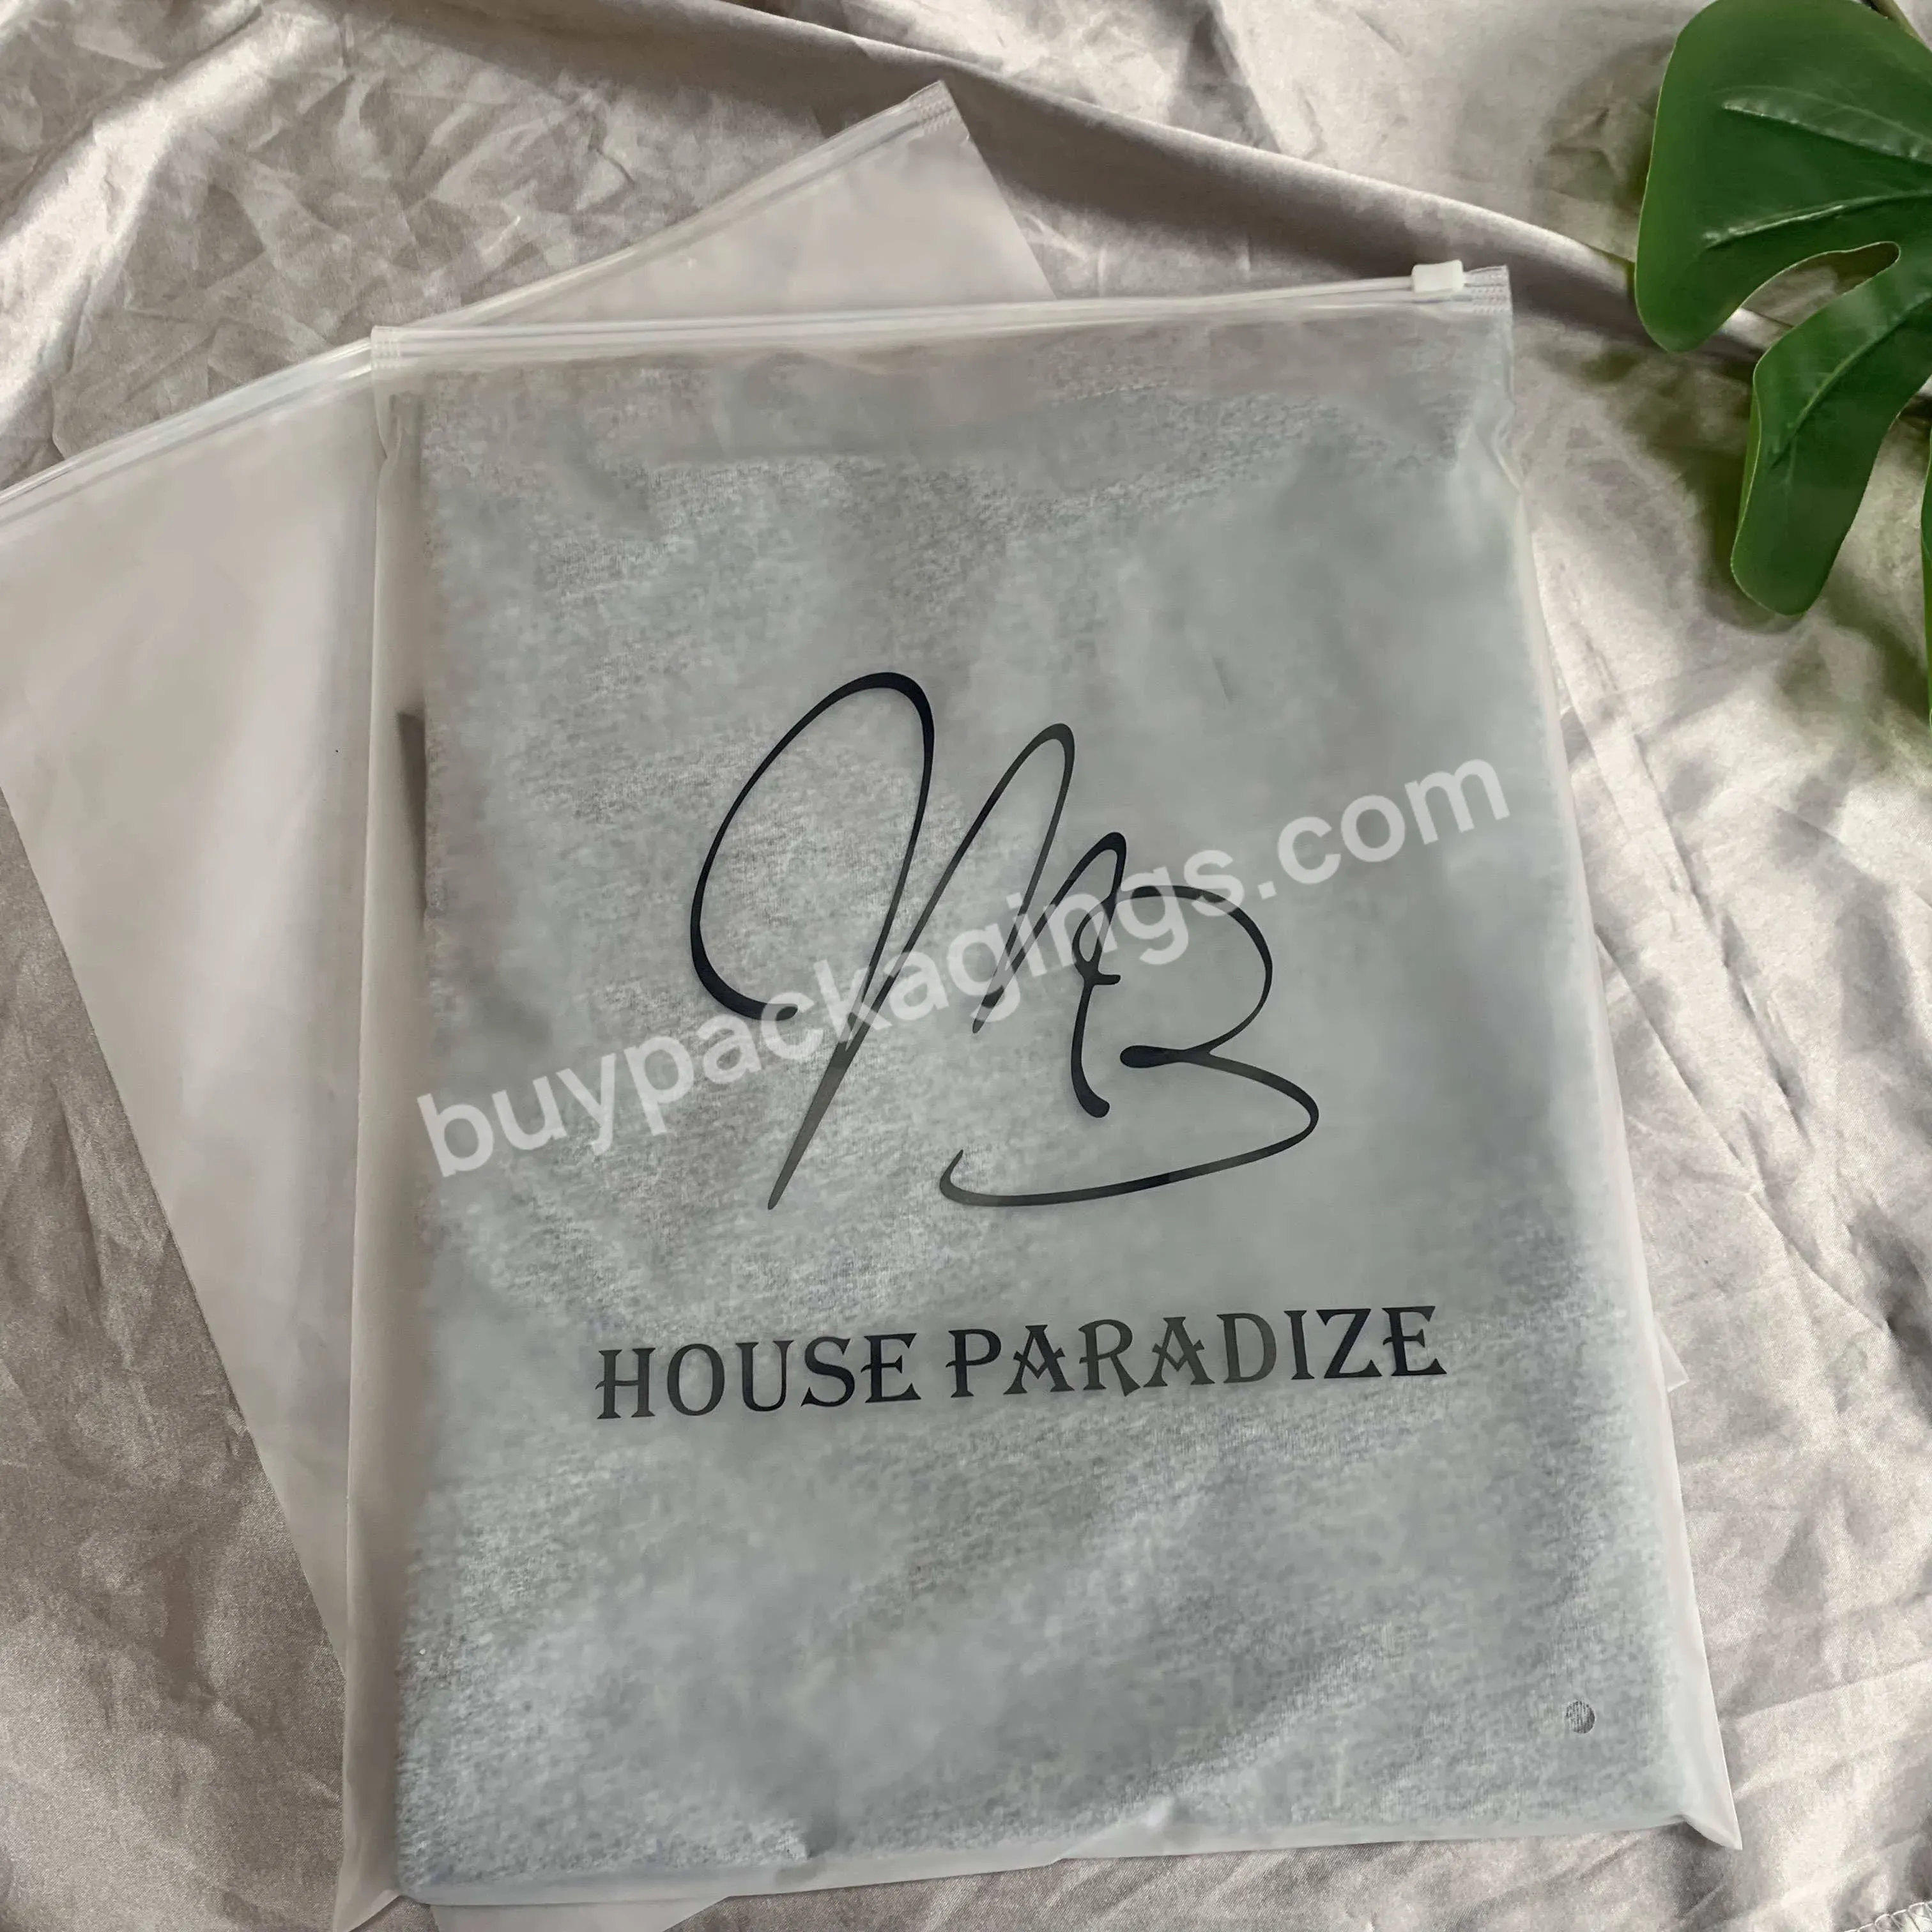 China Hot Sale Product Wholesale Frosted Zipper Bag Custom Size Logo Print Fashionable Design Plastic Package With Own Brand - Buy Wholesale Frosted Zipper Bag,Custom Size Logo Print,Plastic Package With Own Brand.